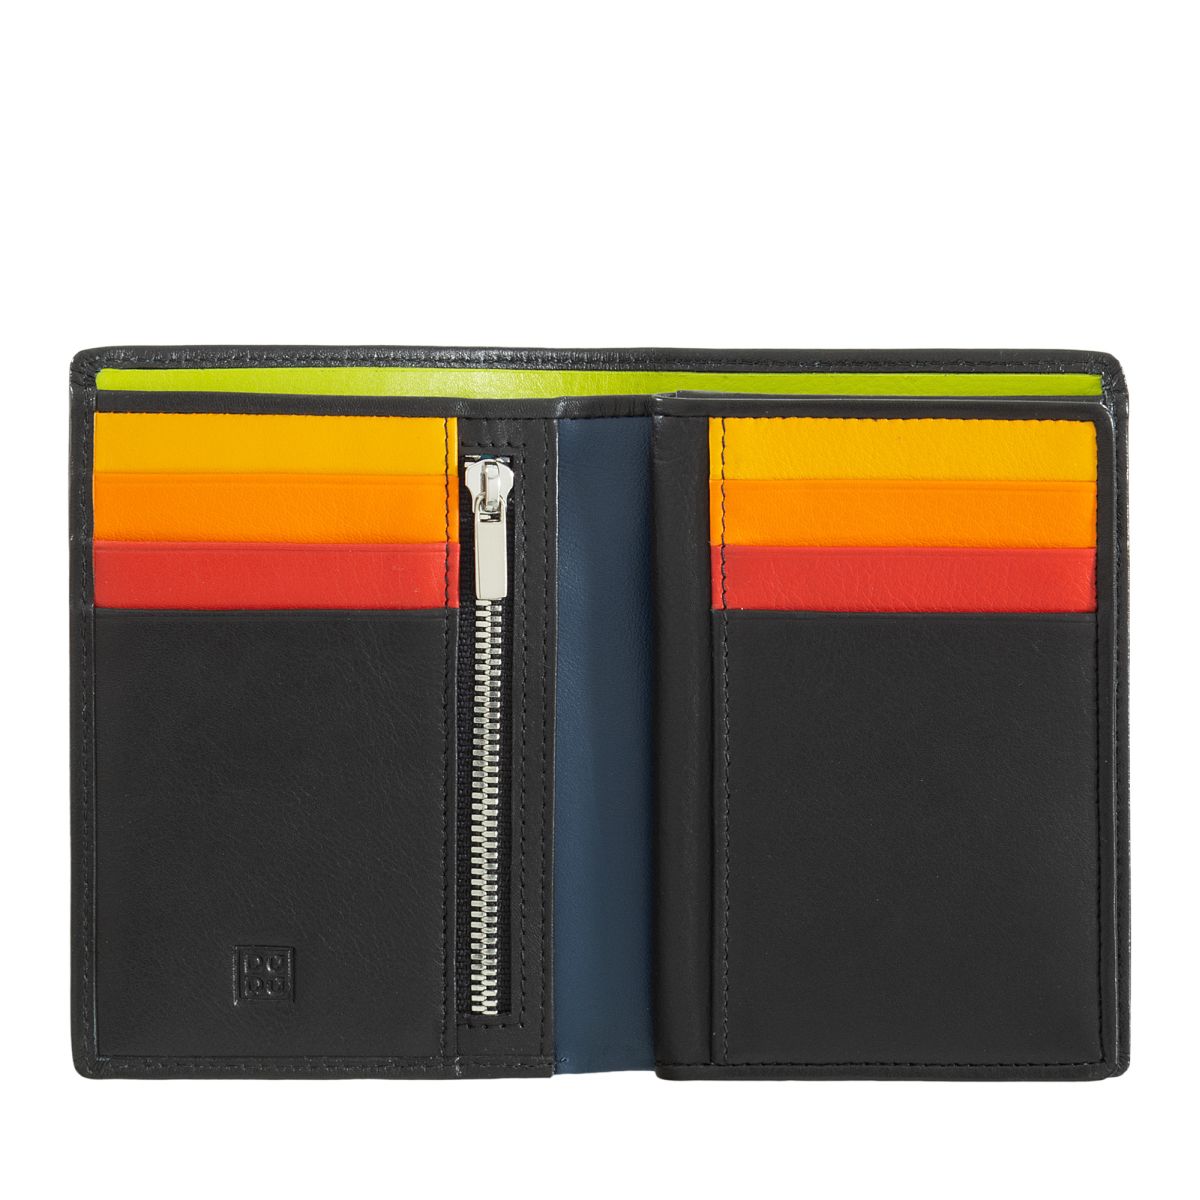 Mans leather folding wallet with inner zip - Black